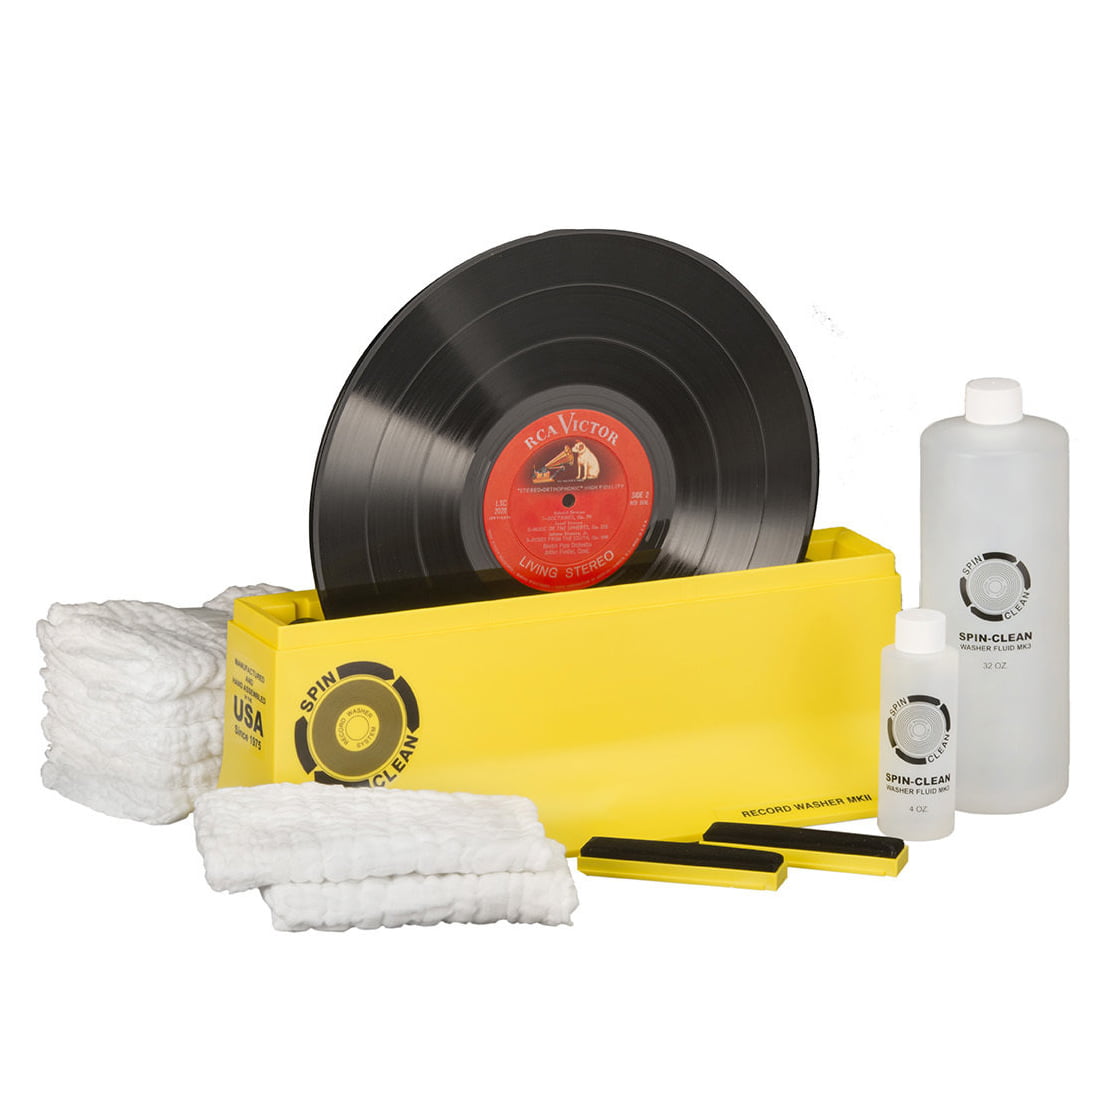 Spin-Clean SPINSYS2 Record Washer MKII (Deluxe Kit)